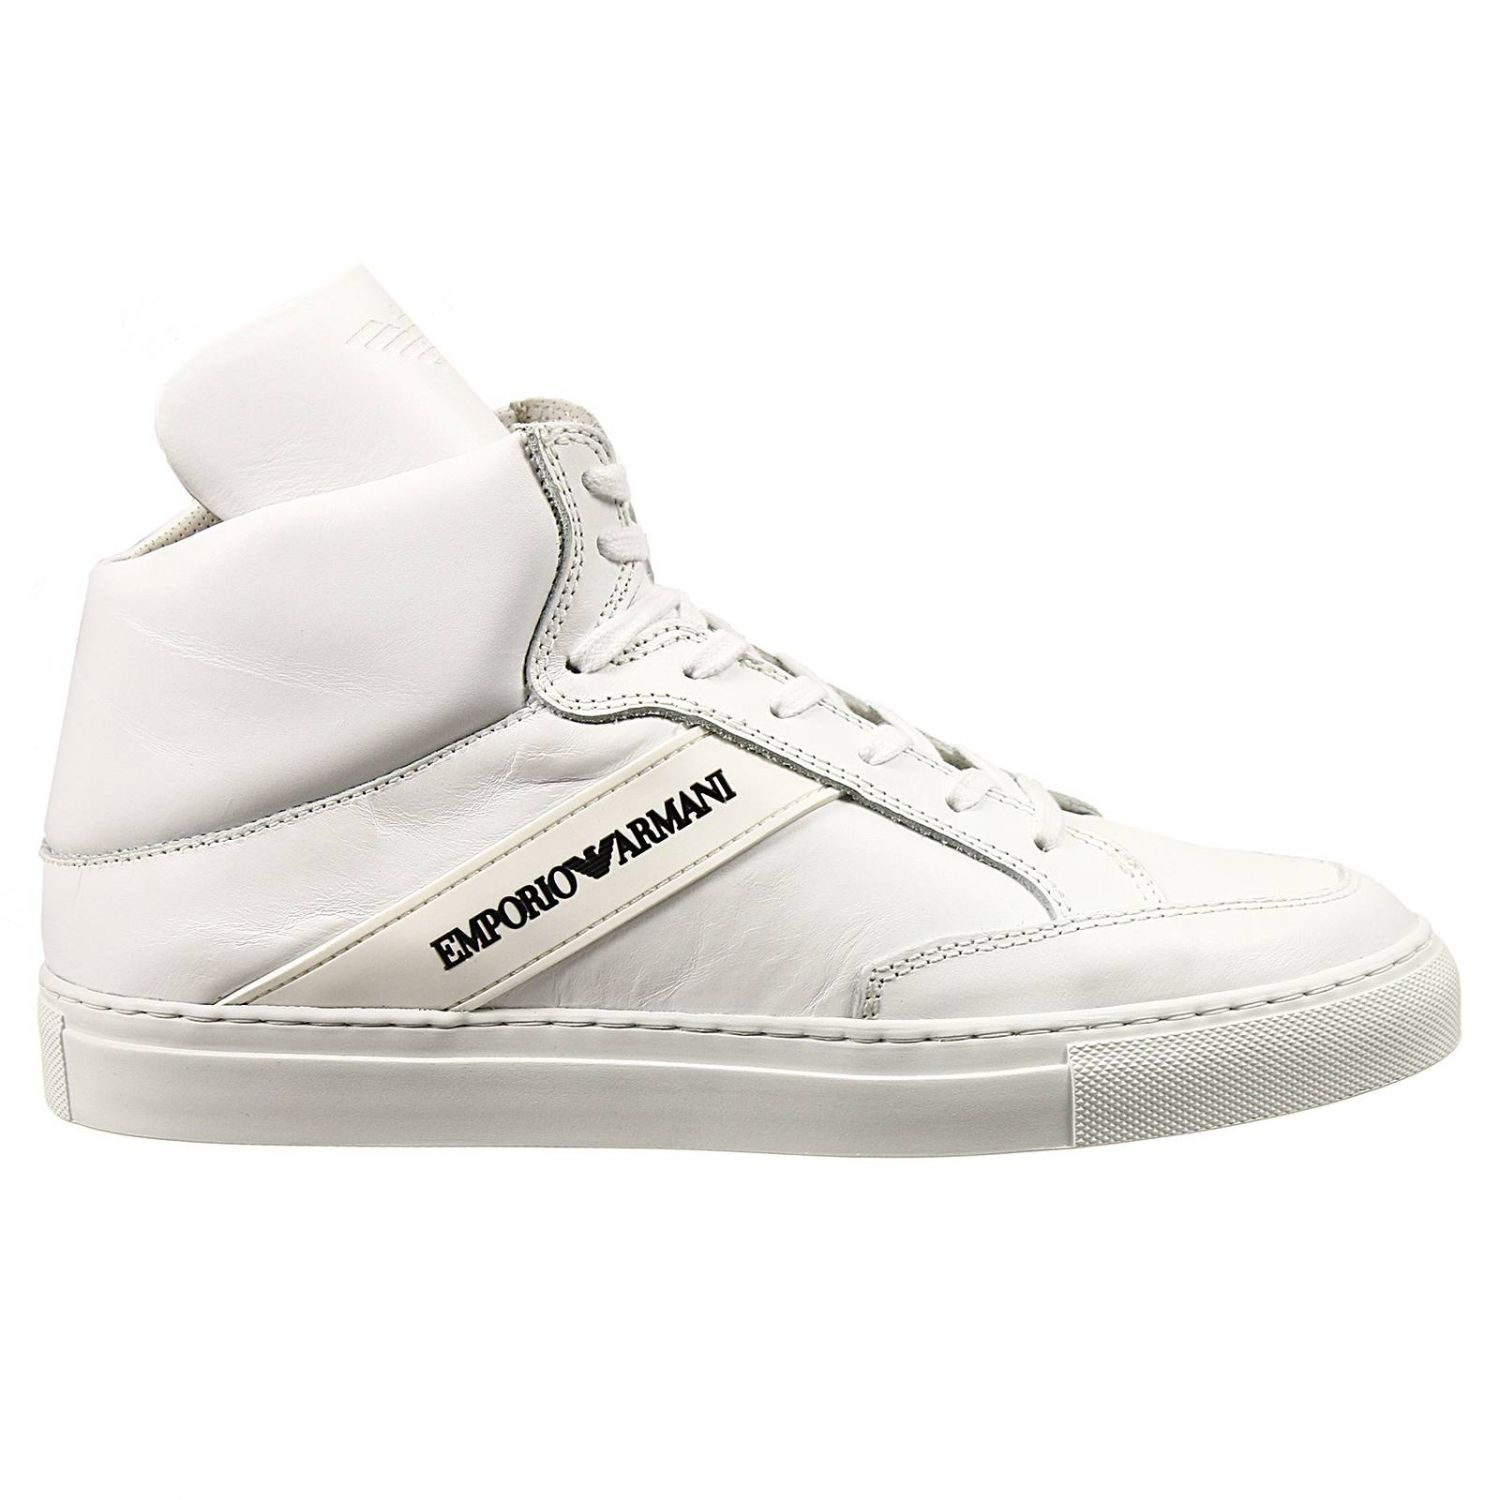 Emporio Armani Sneakers Shoes Ankle 